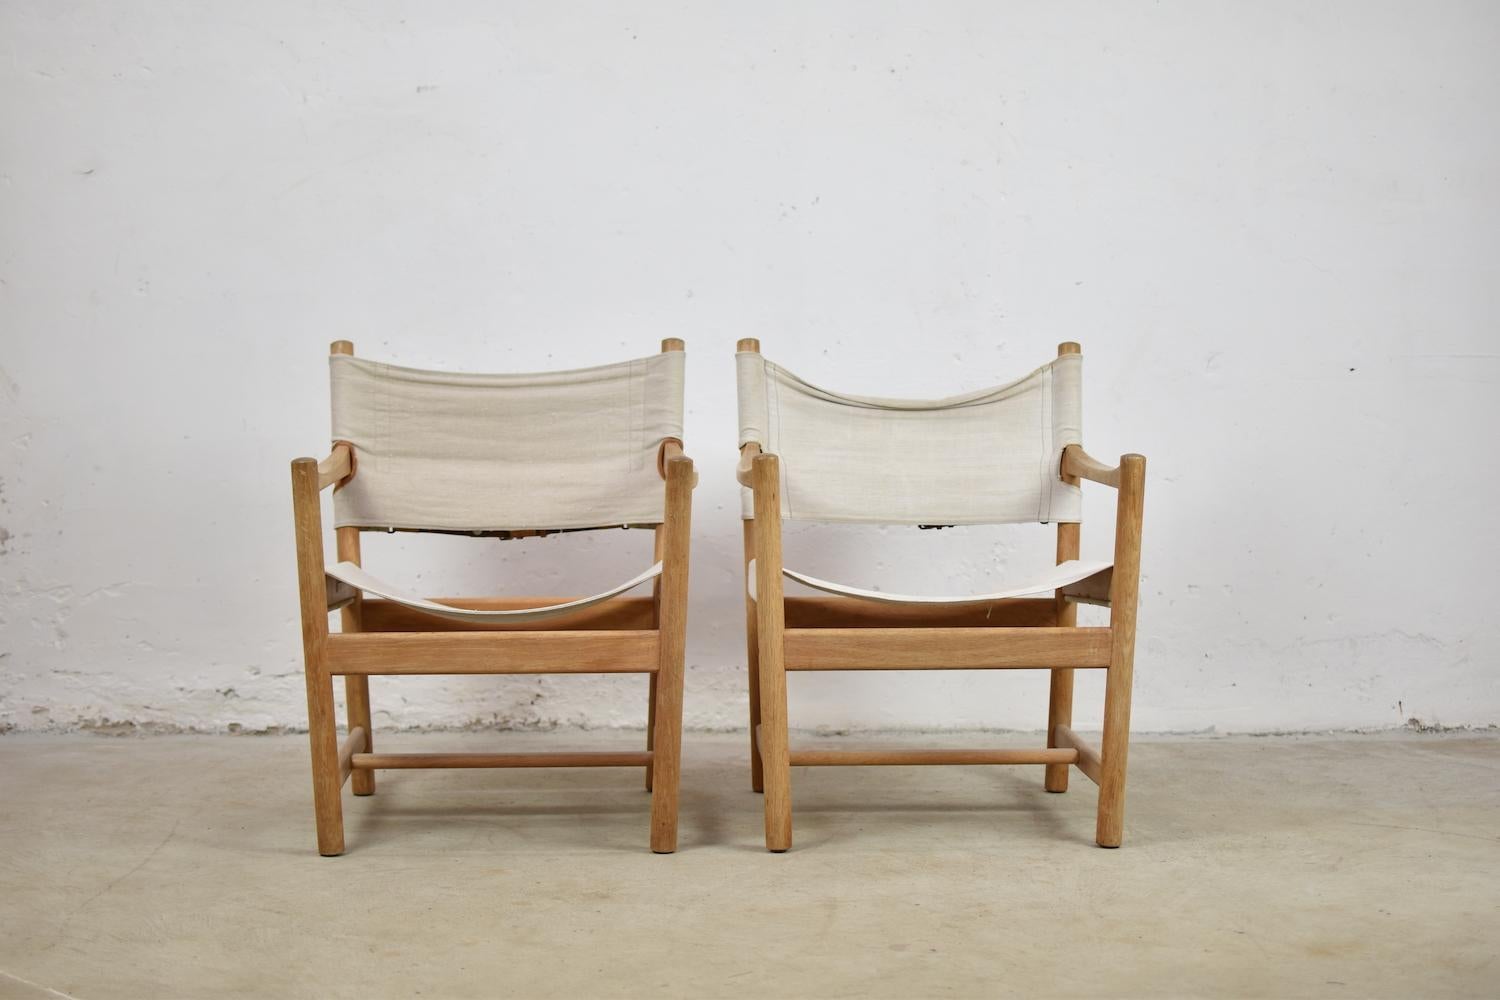 Set of two easy chairs by Ditte and Adrian Heath for FDB Møbler, Denmark, 1960s. These chairs features a tapered frame made of oak and seats and back made of canvas with cognac leather straps. Visible signs of age and wear, but overall in very good